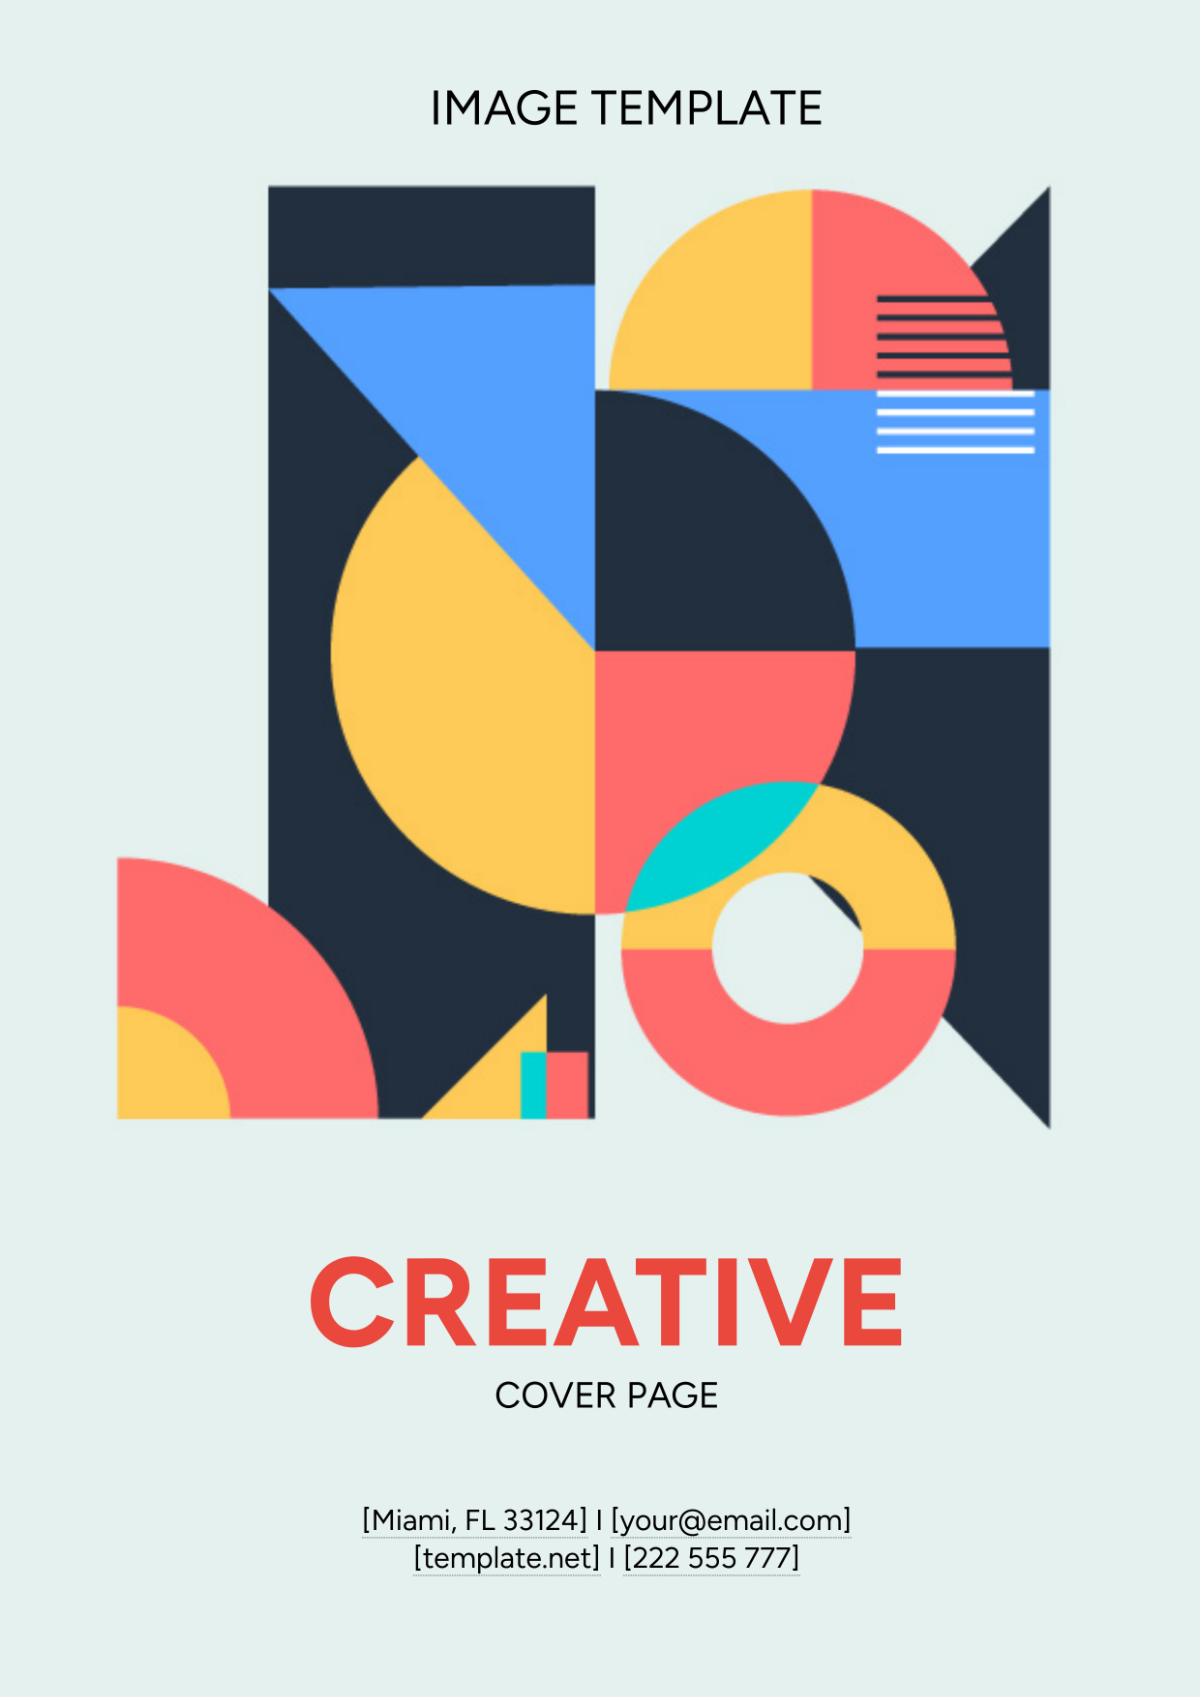 Free Creative Cover Page Image Template